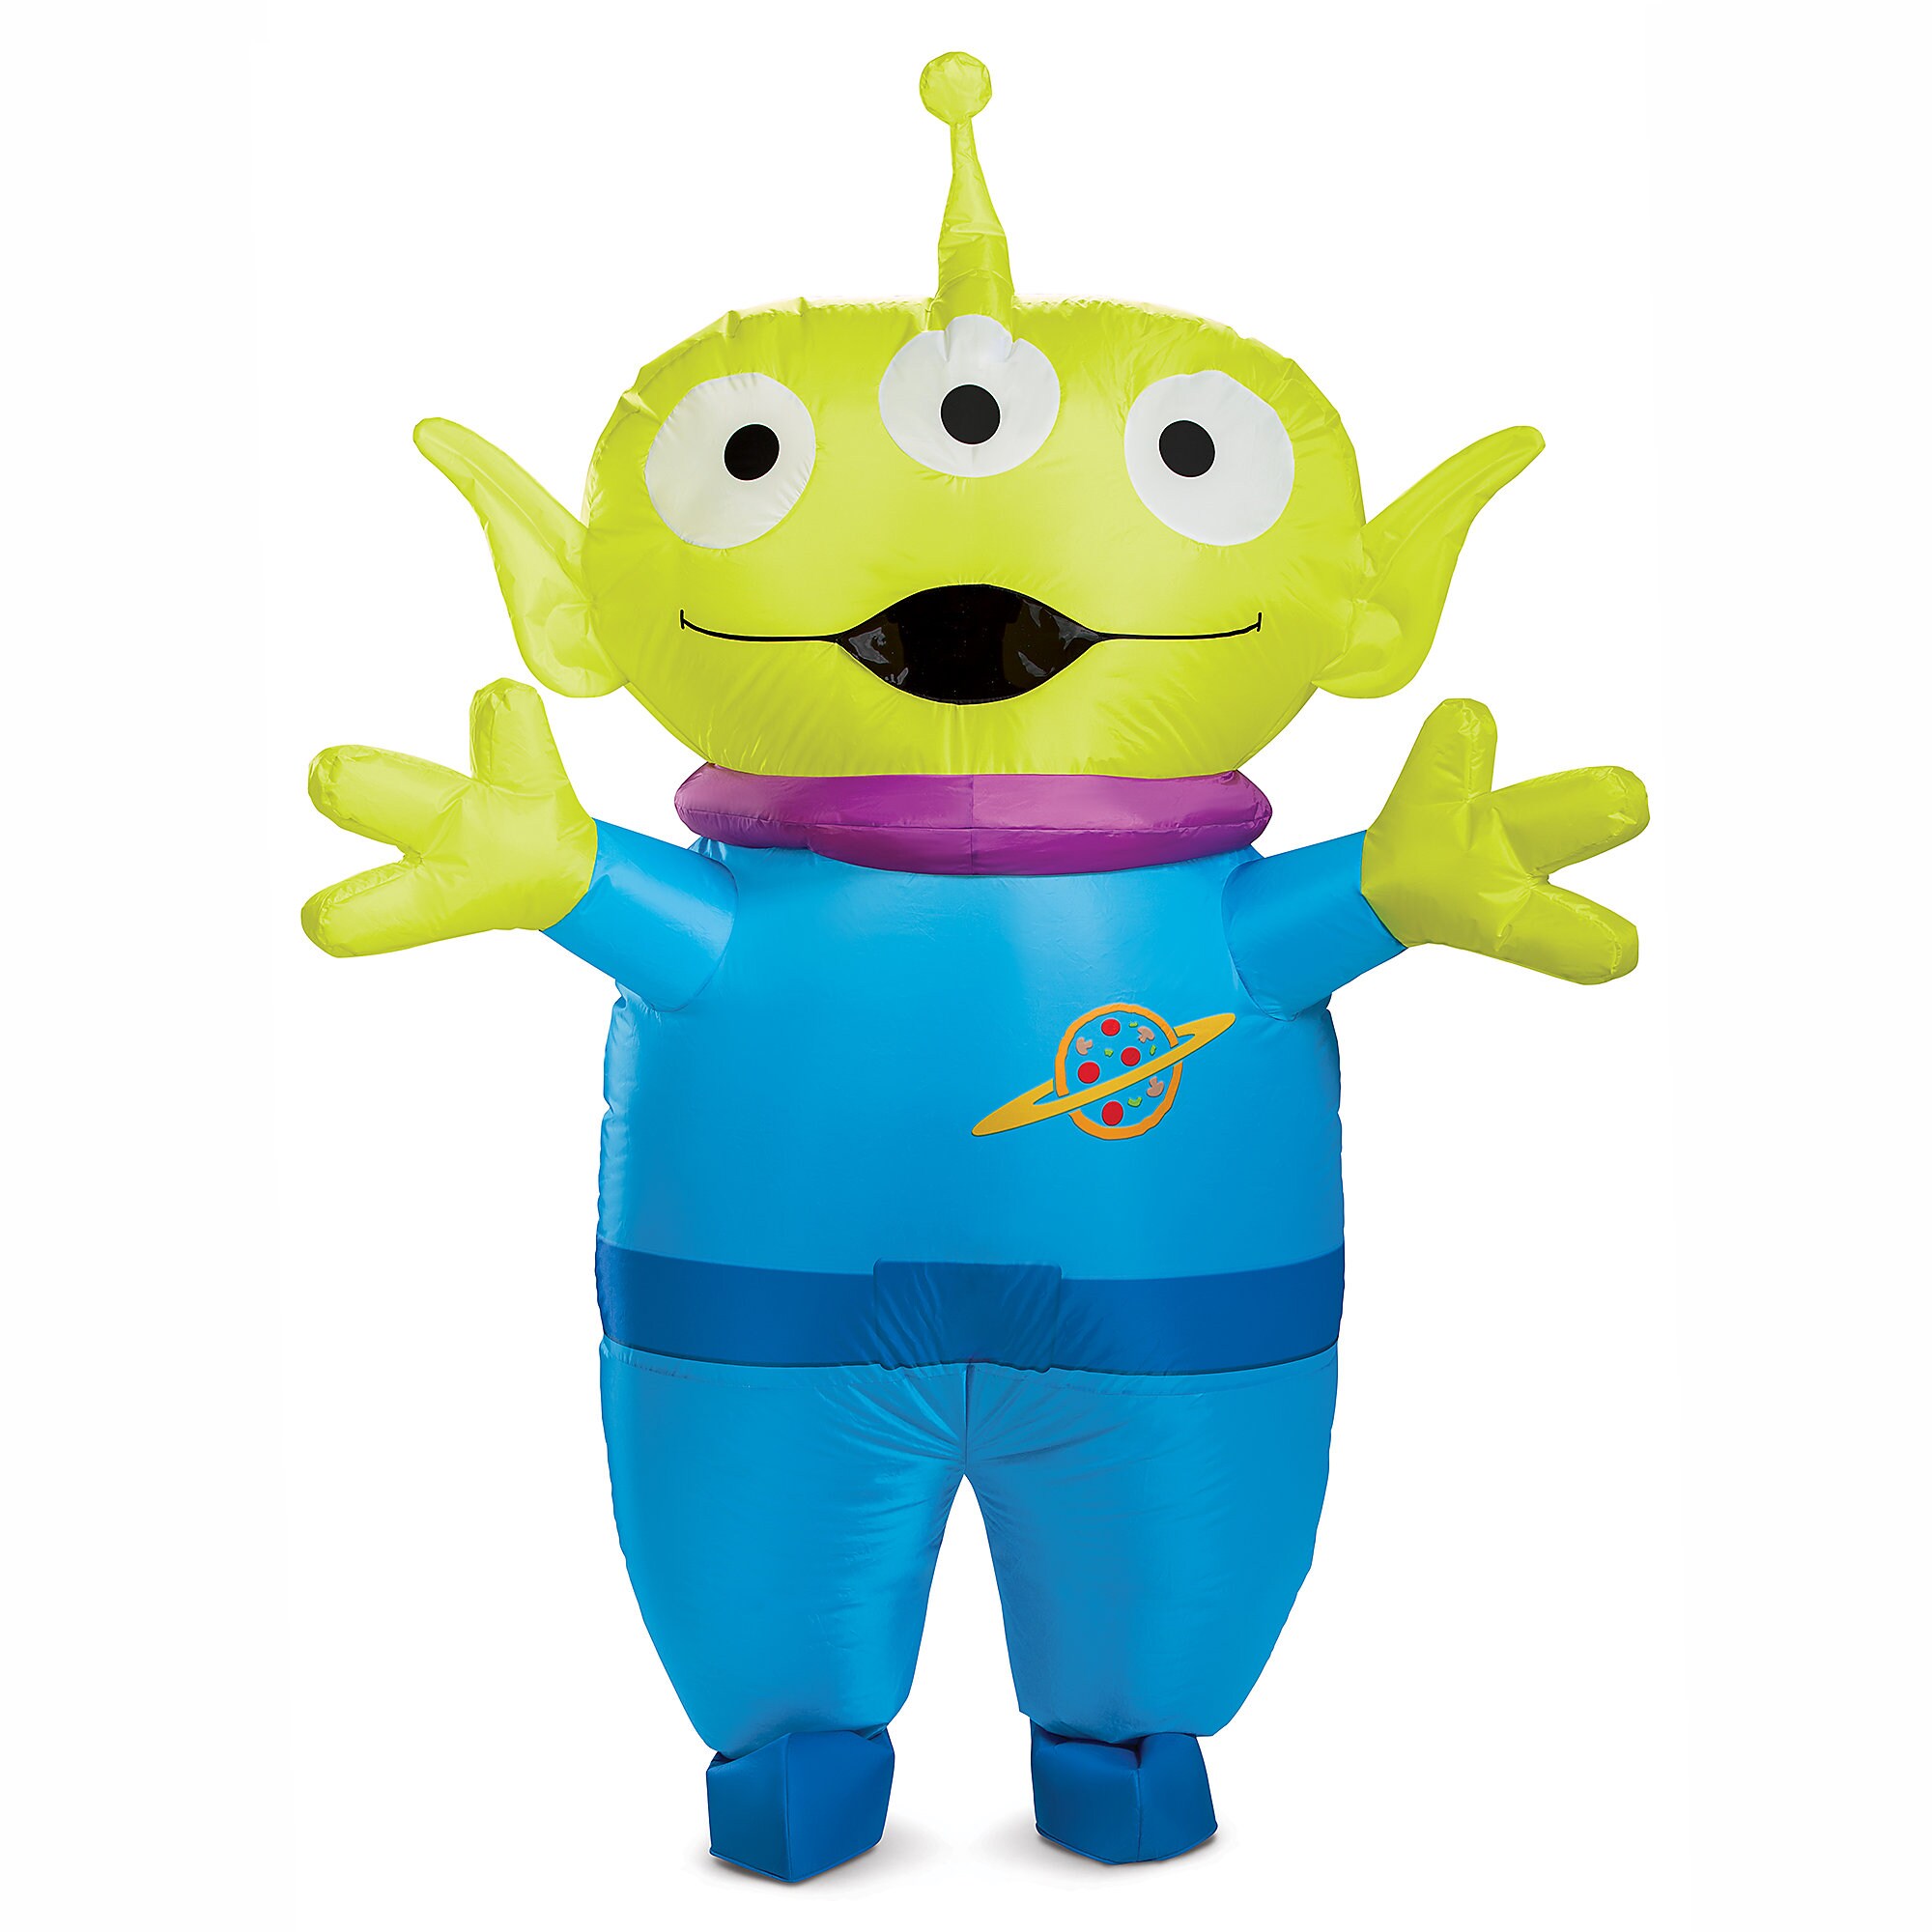 Toy Story Alien Inflatable Costume for Adults by Disguise